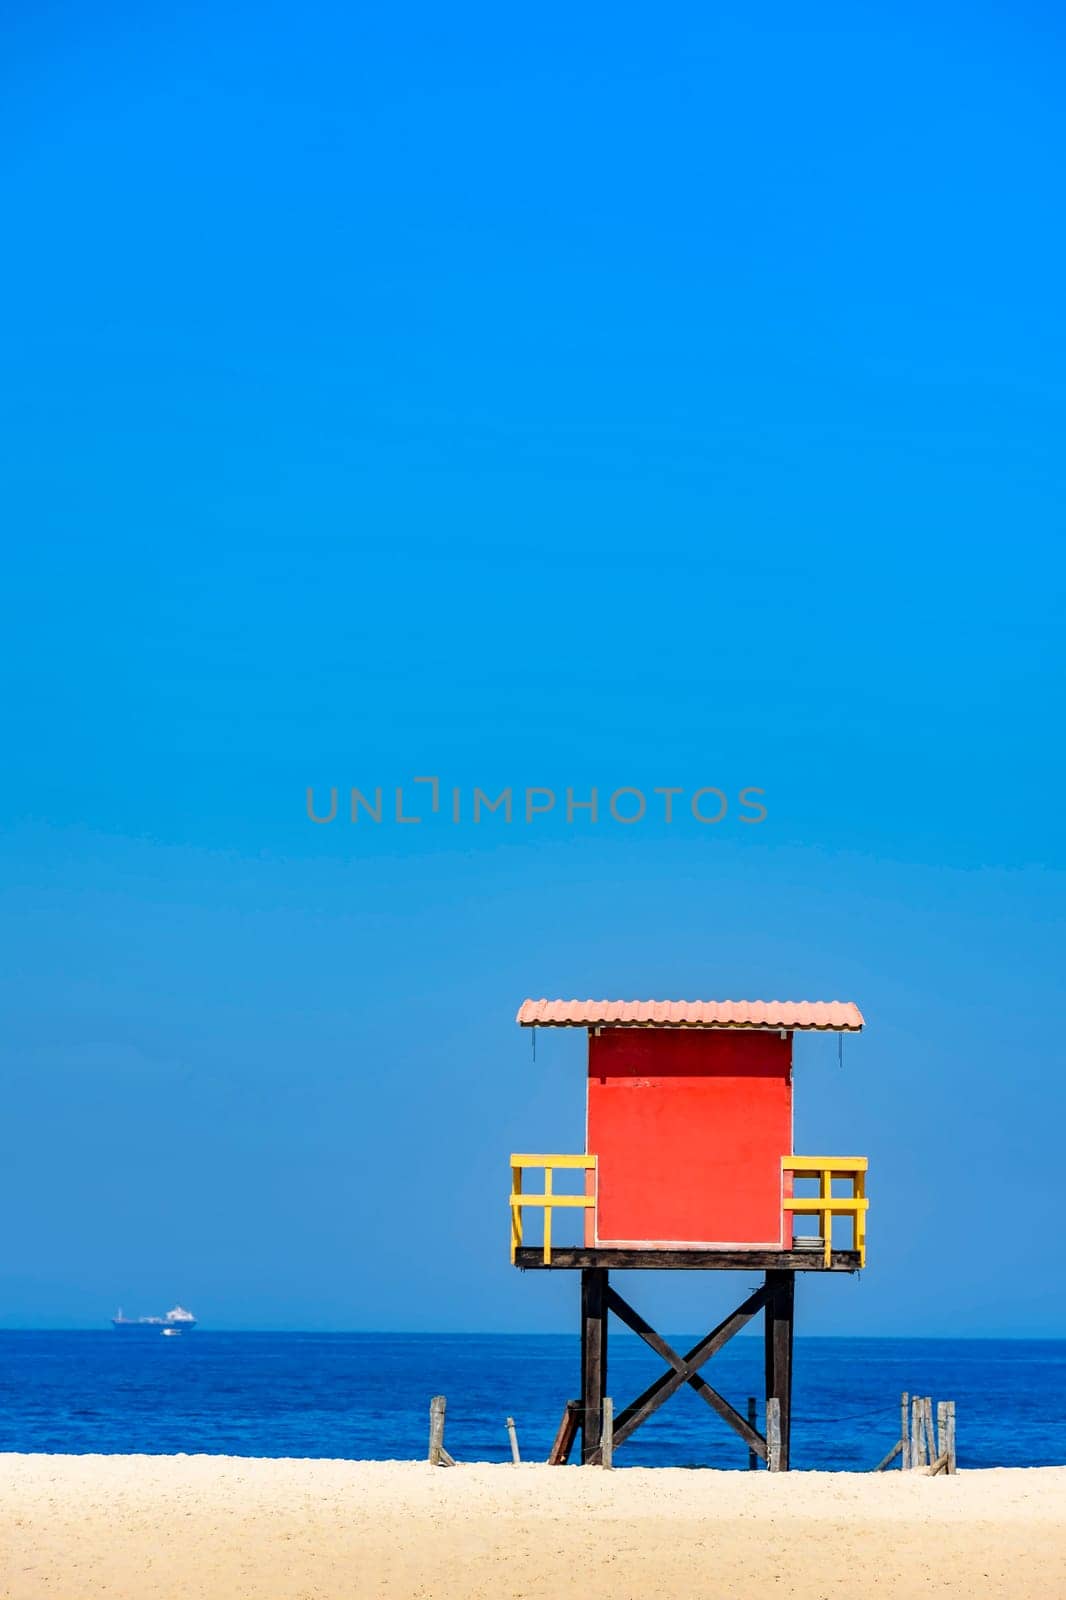 Rescue cabin on Copacabana beach on a sunny day by Fred_Pinheiro